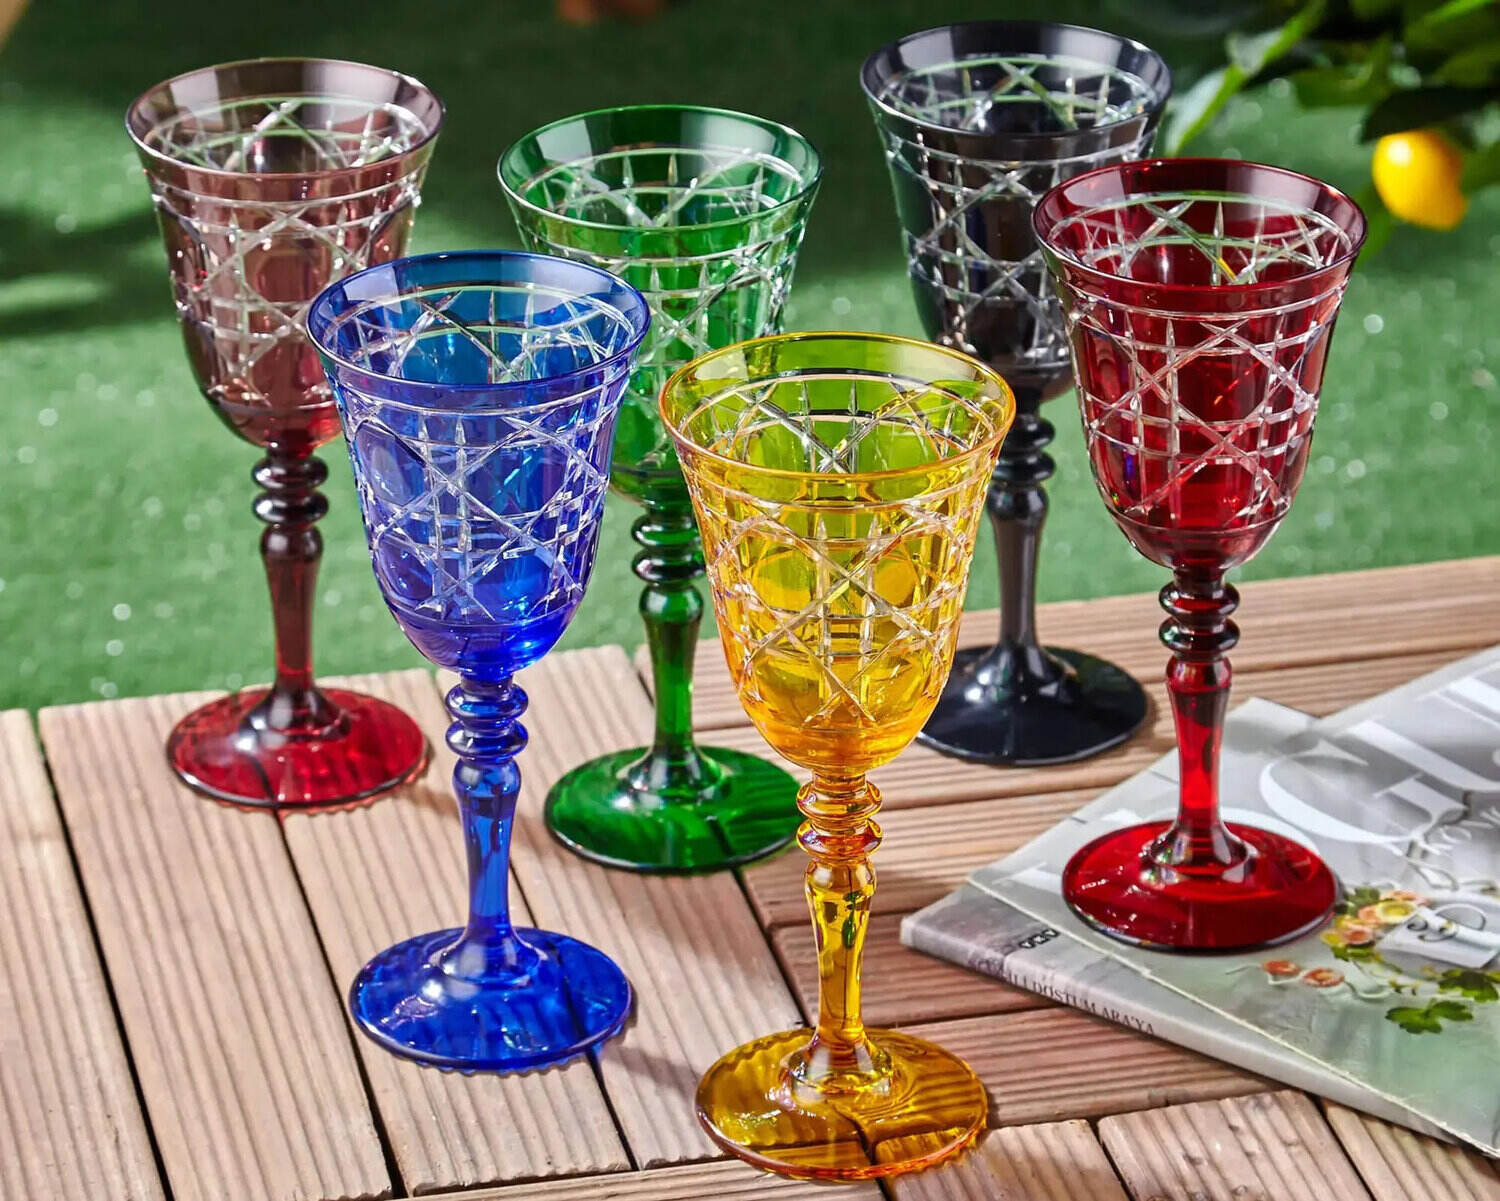 https://storables.com/wp-content/uploads/2023/09/how-to-store-crystal-glassware-1695183716.jpg